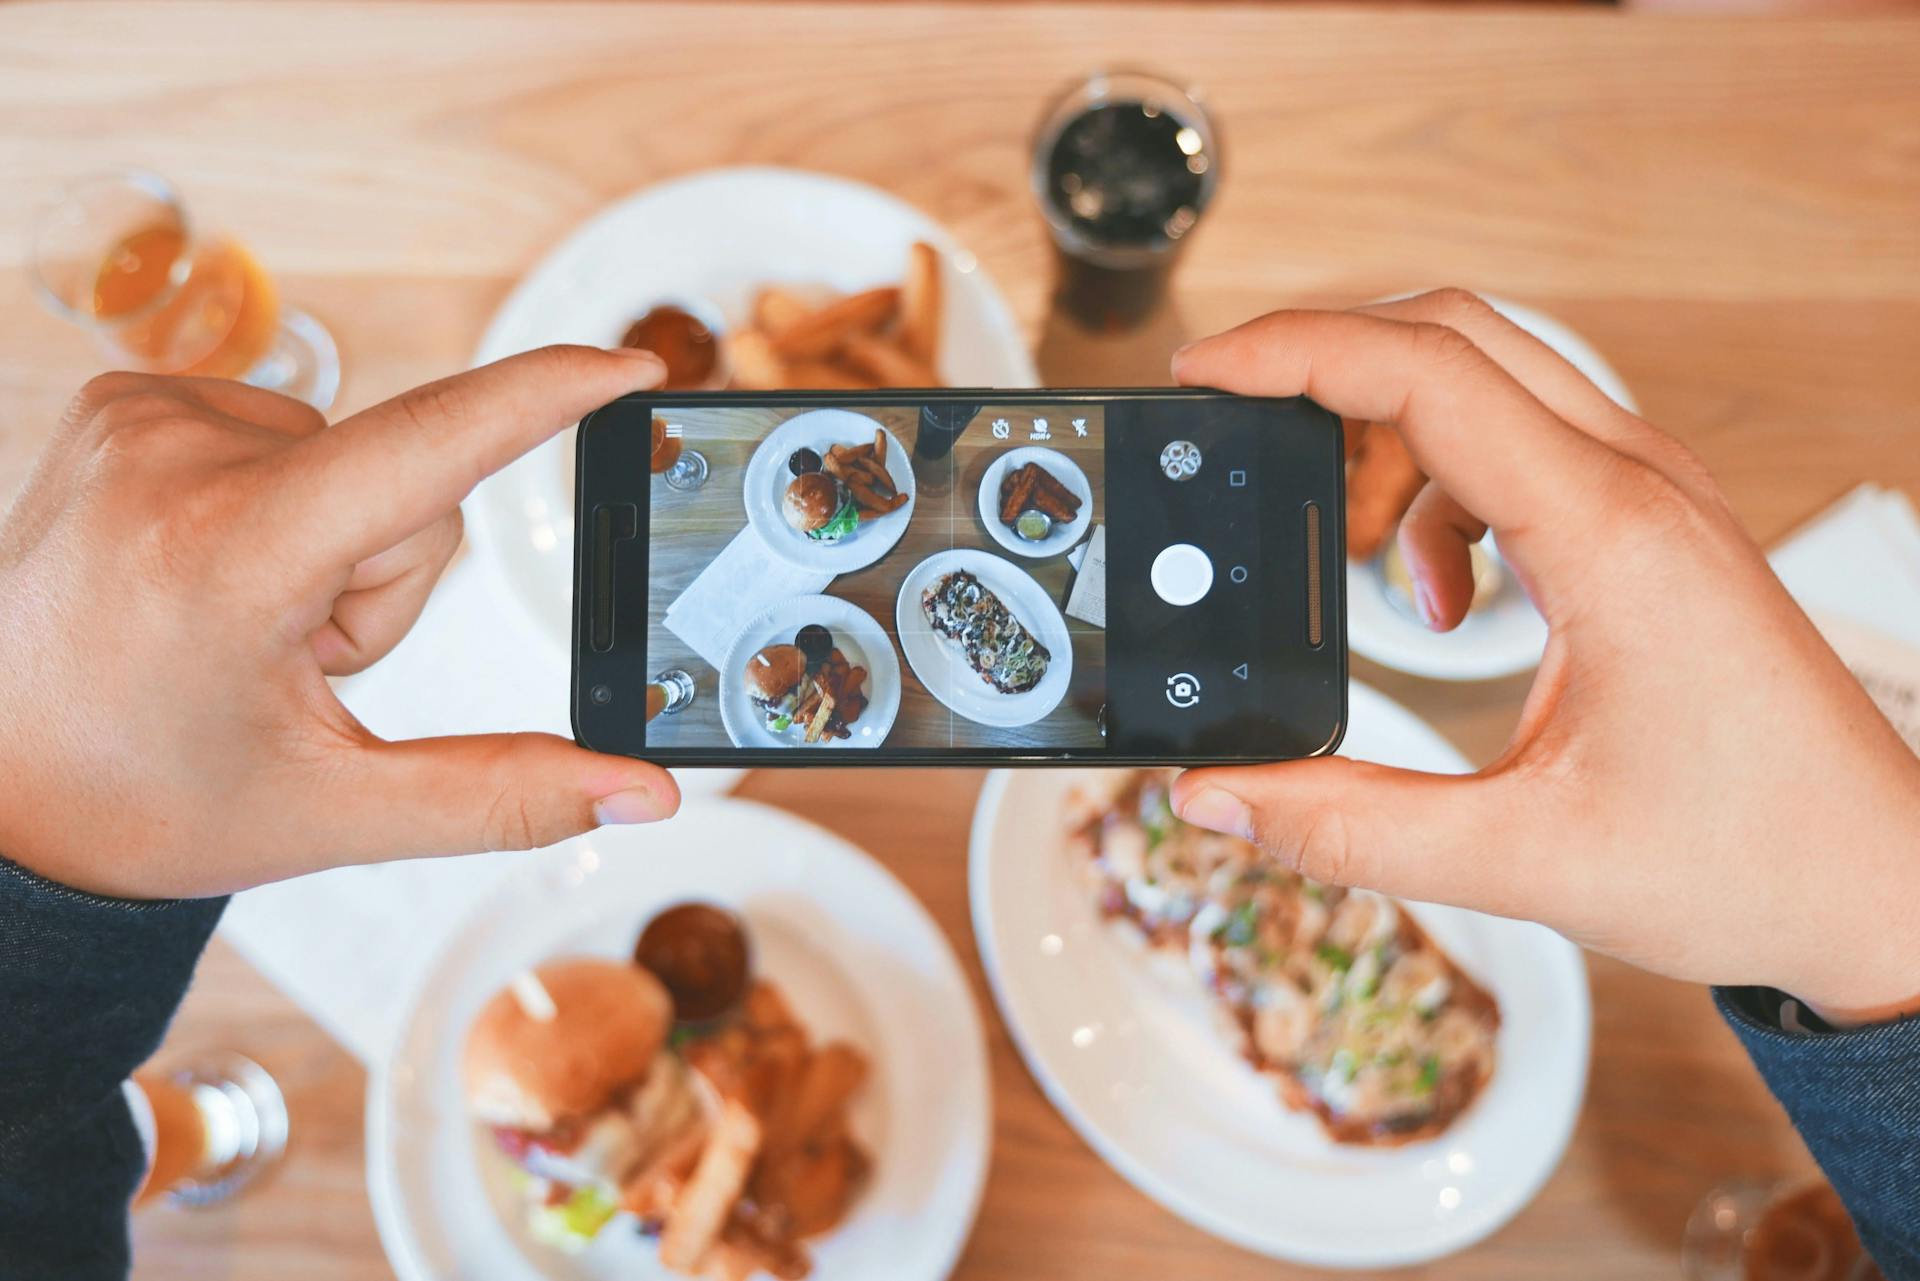 person holding a phone from above and taking a photo of food on the table